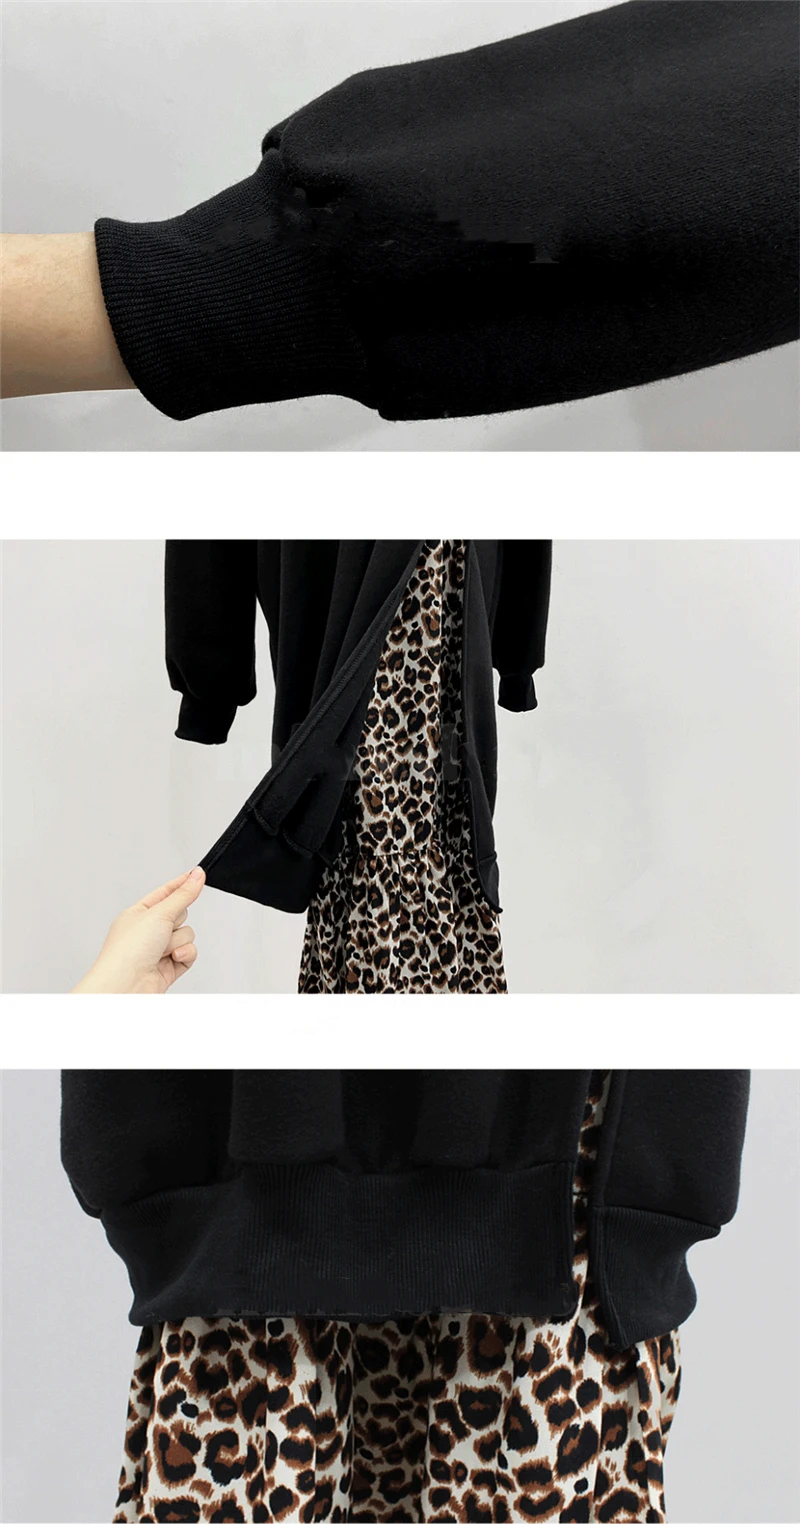 Hf0733f11c1244f5d991ea748b81ac0ae4 - Spring / Autumn O-Neck Long Sleeves Hooded Fake Two-Piece Leopard Print Midi Dress